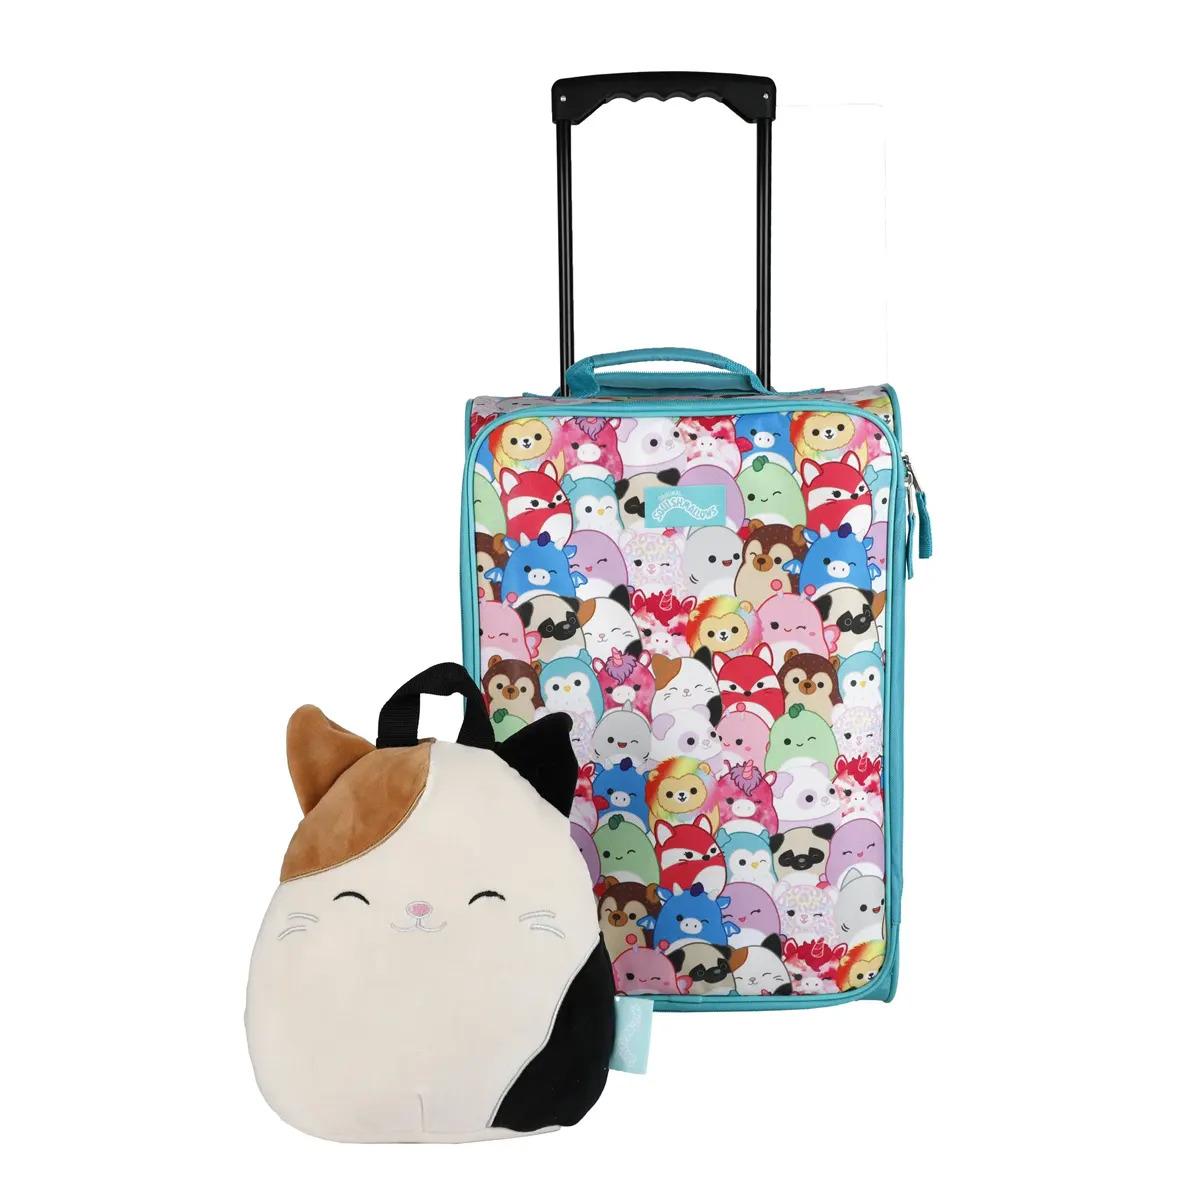 Squishmallows Travel Set with Luggage and Plush Backpack for $27